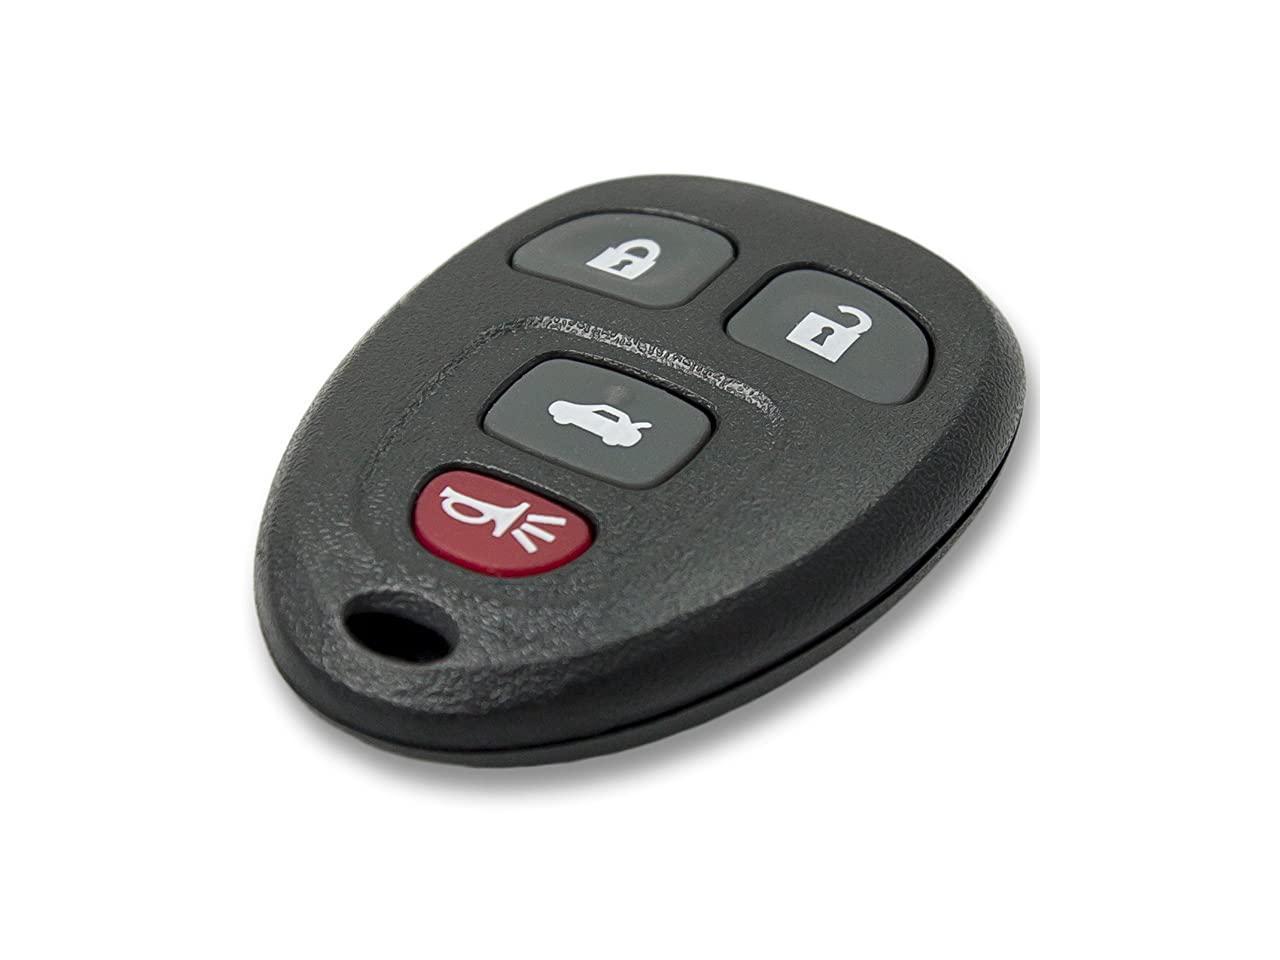 Keyless2Go New Keyless Entry Replacement Remote Car Key Fob for Select Malibu Cobalt Lacrosse Grand Prix G5 G6 Models That use 15252034 KOBGT04A Remote 2 Pack 